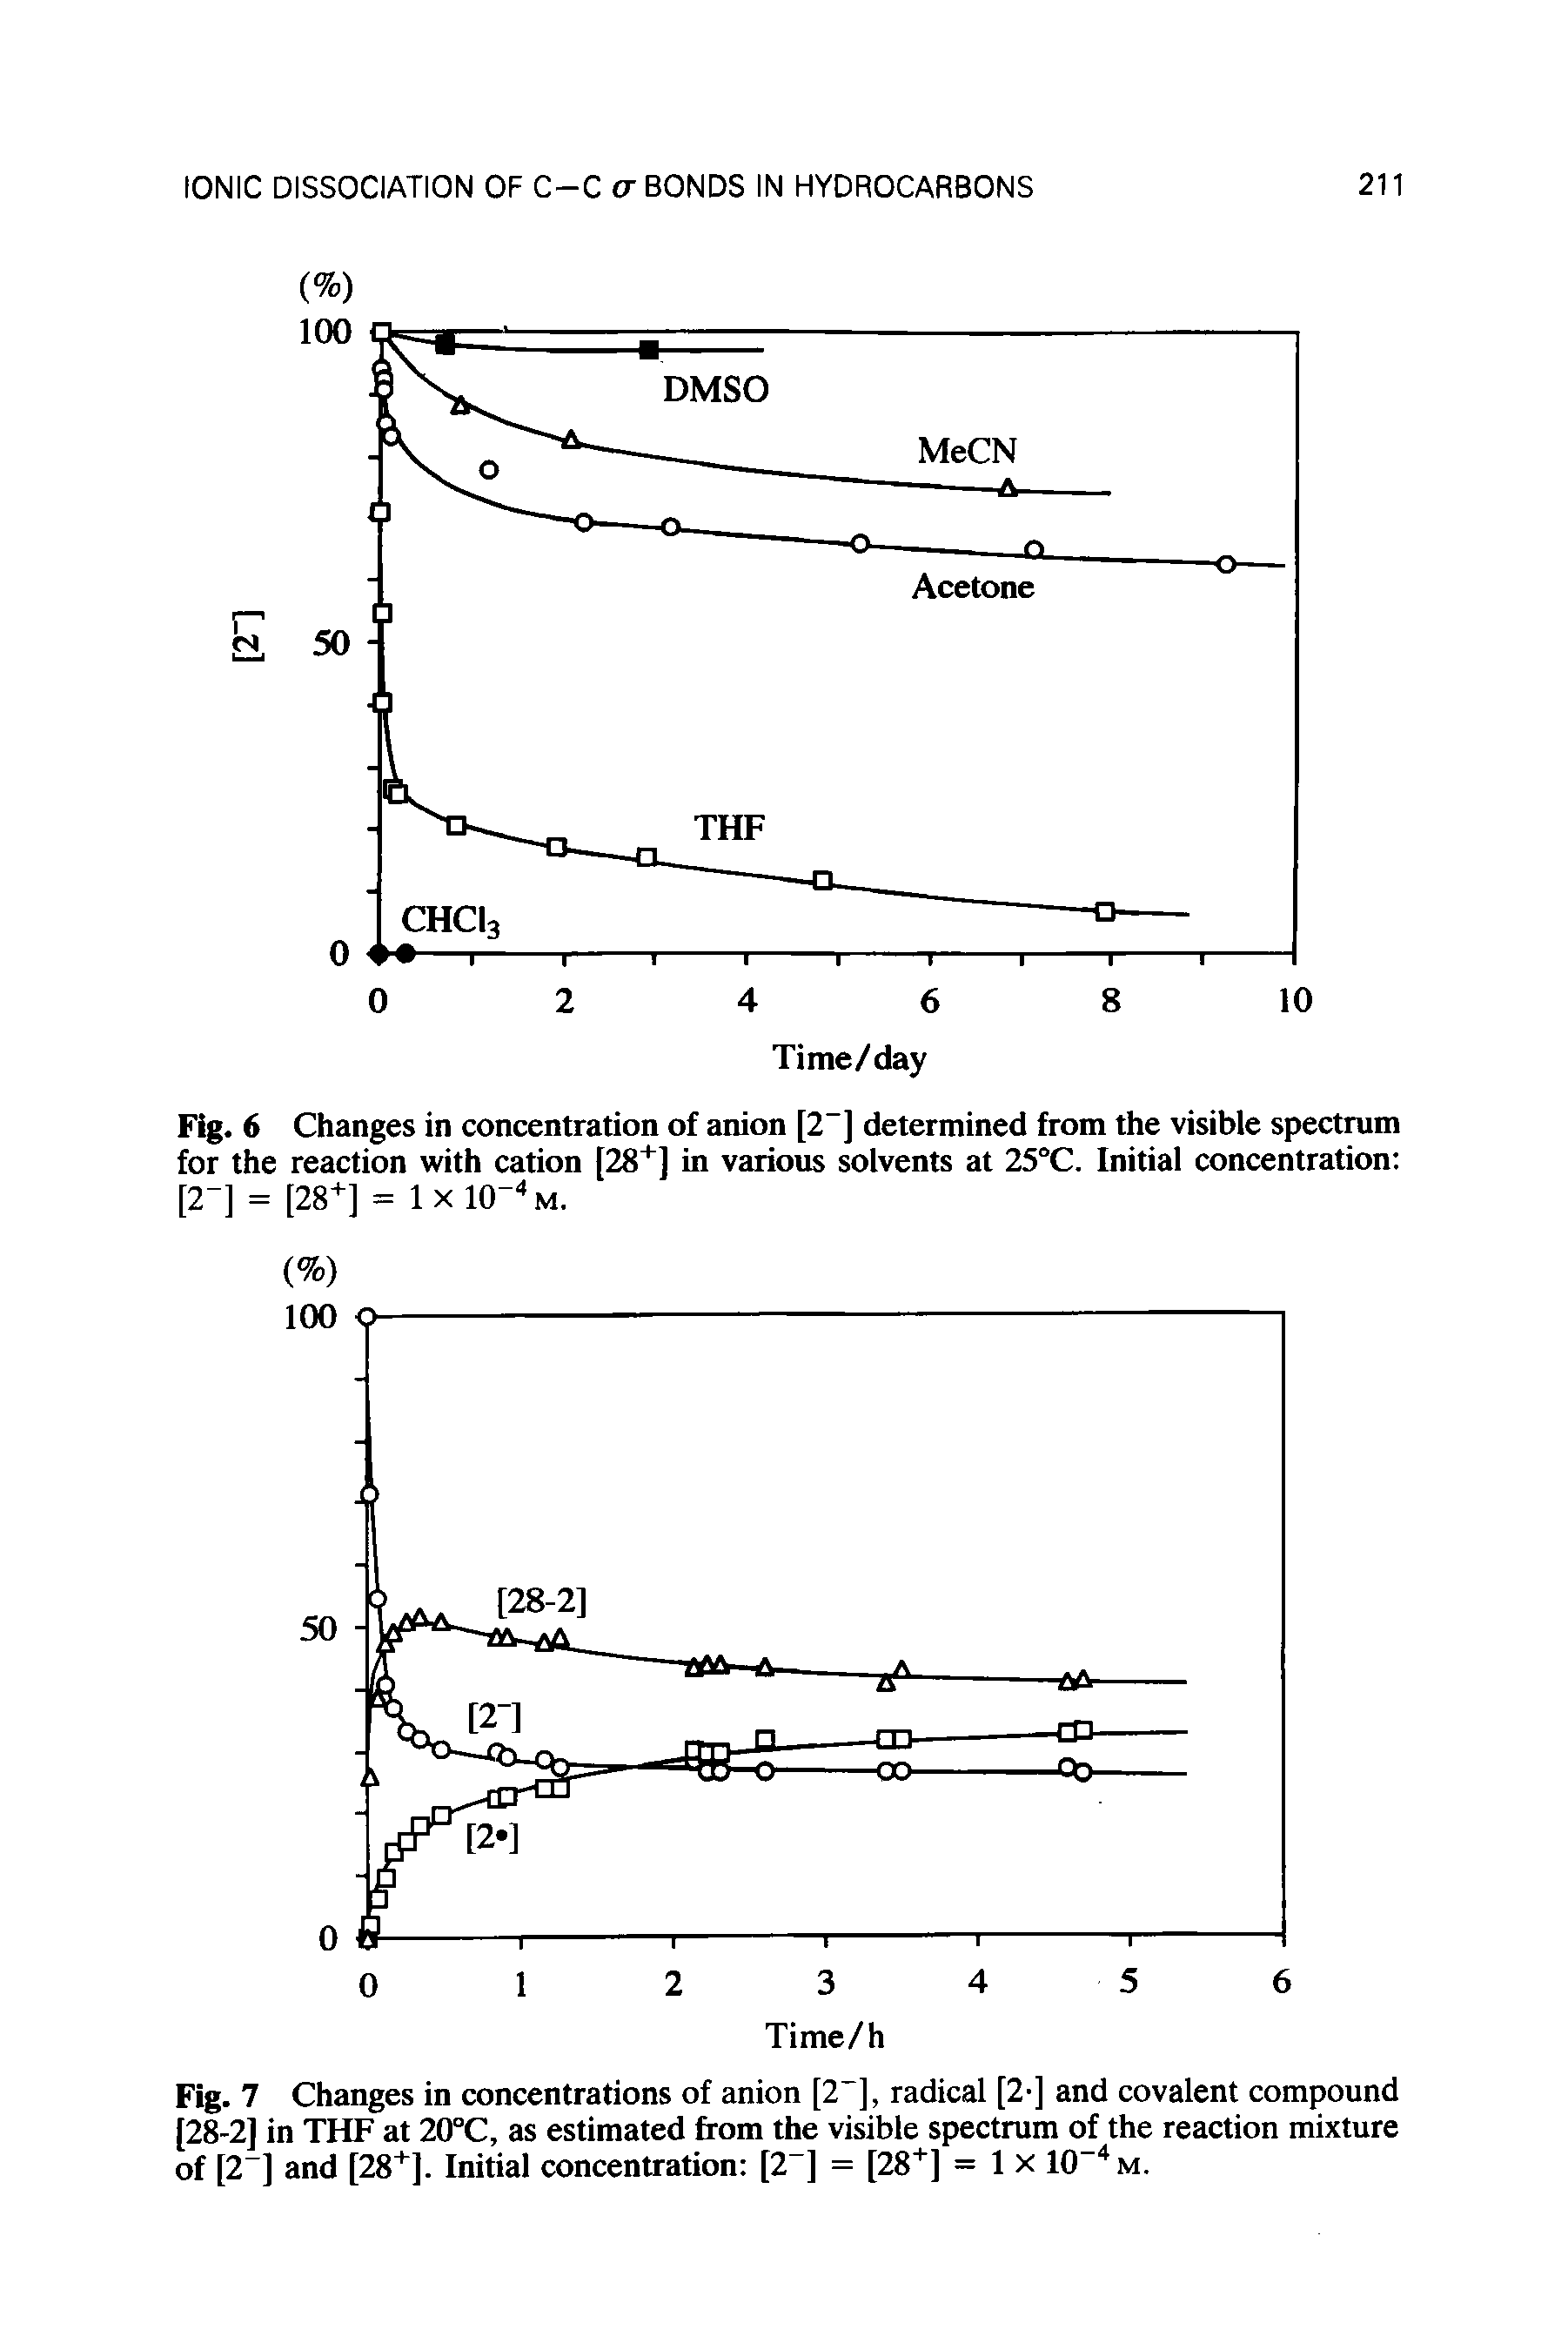 Fig. 7 Changes in concentrations of anion [2 ], radical [2-j and covalent compound [28-2] in THF at 20°C, as estimated from the visible spectrum of the reaction mixture of [2 ] and [28+]. Initial concentration [2 ] = [28+] = 1 x 10 m.